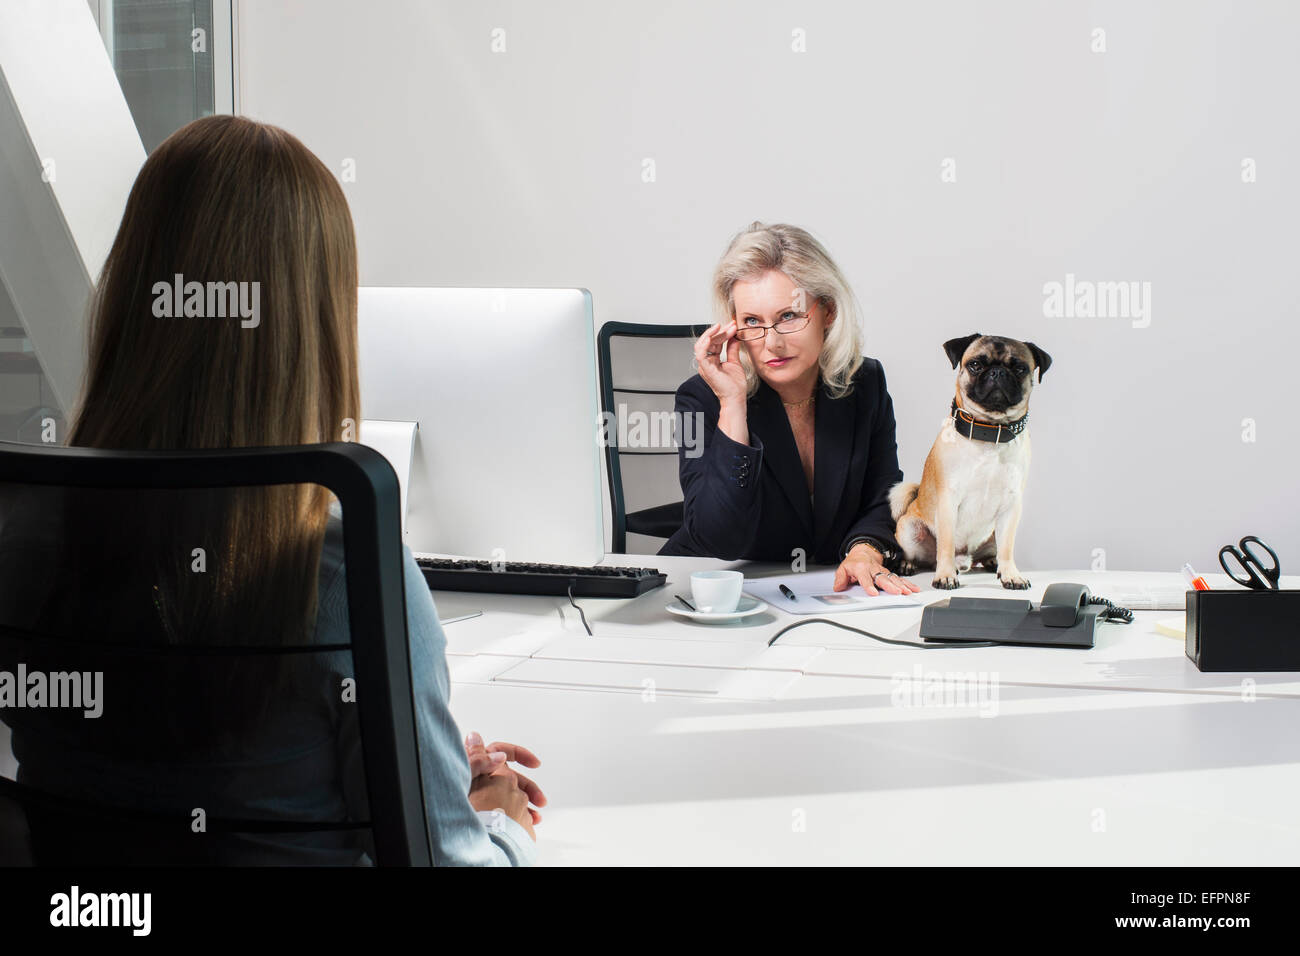 Female manager with dog interviewing woman Stock Photo